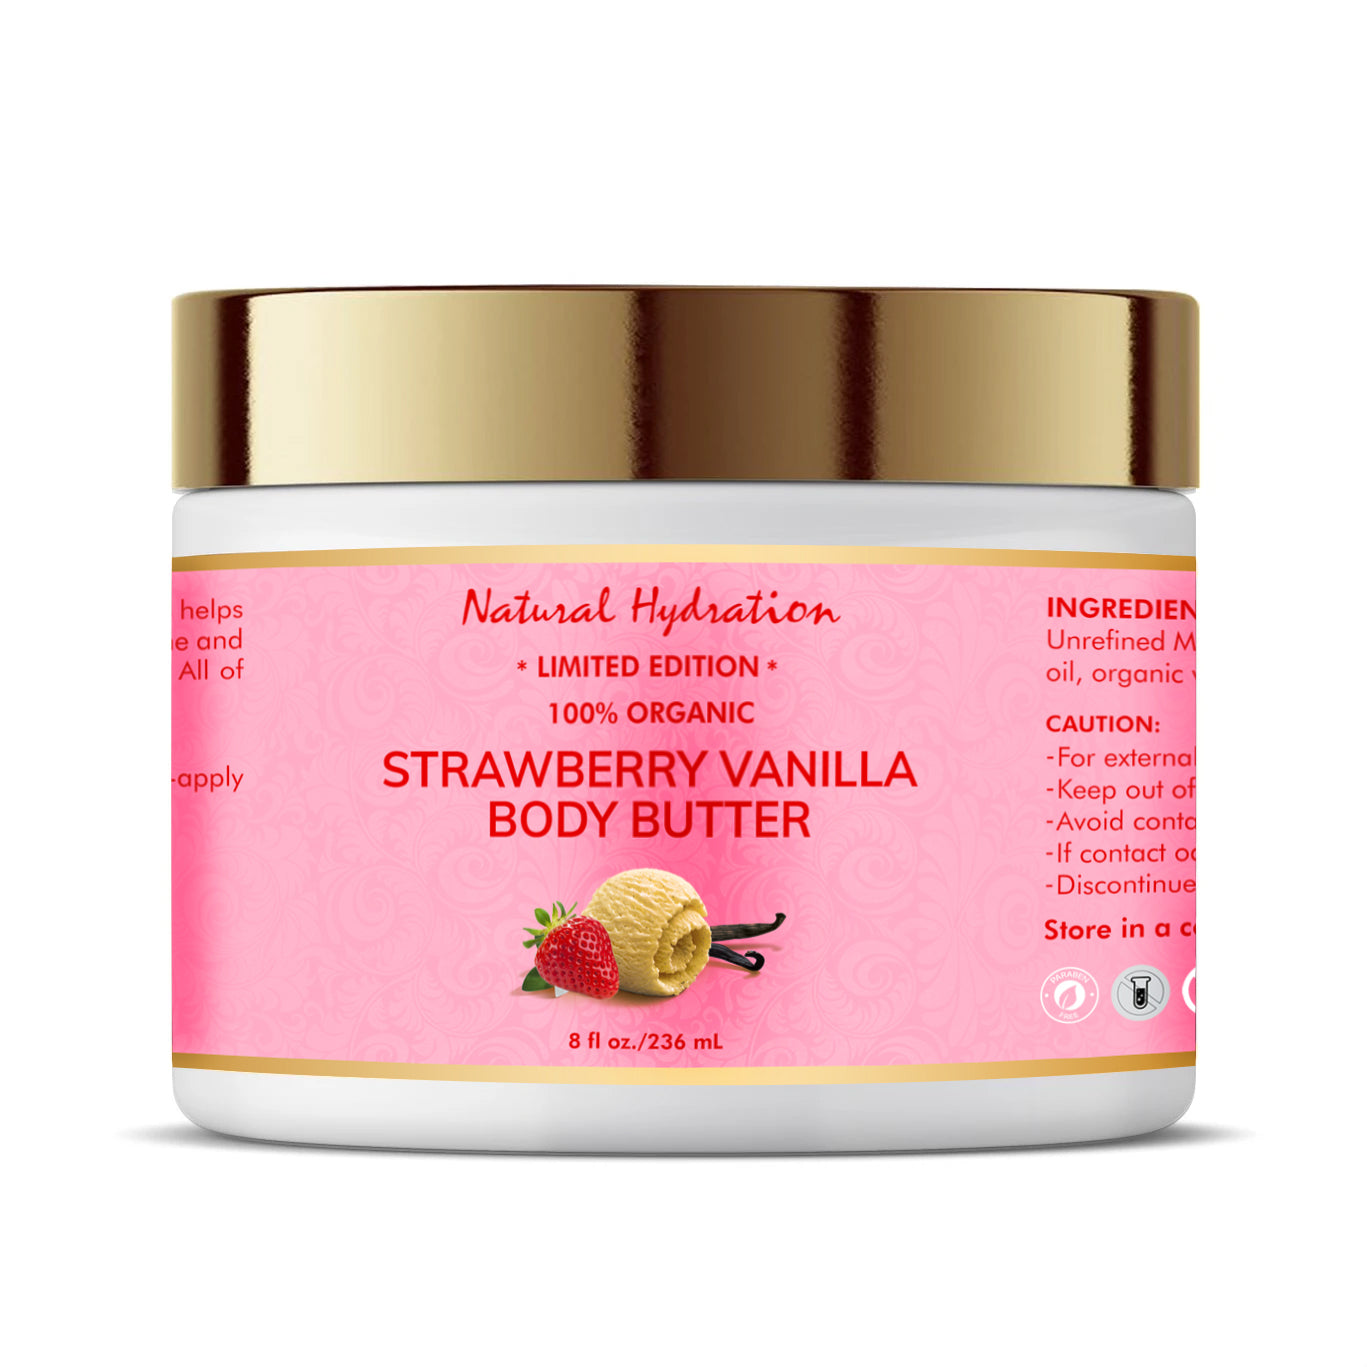 *Limited Edition* Strawberry Vanilla Body Butter | Natural Hydration Skincare